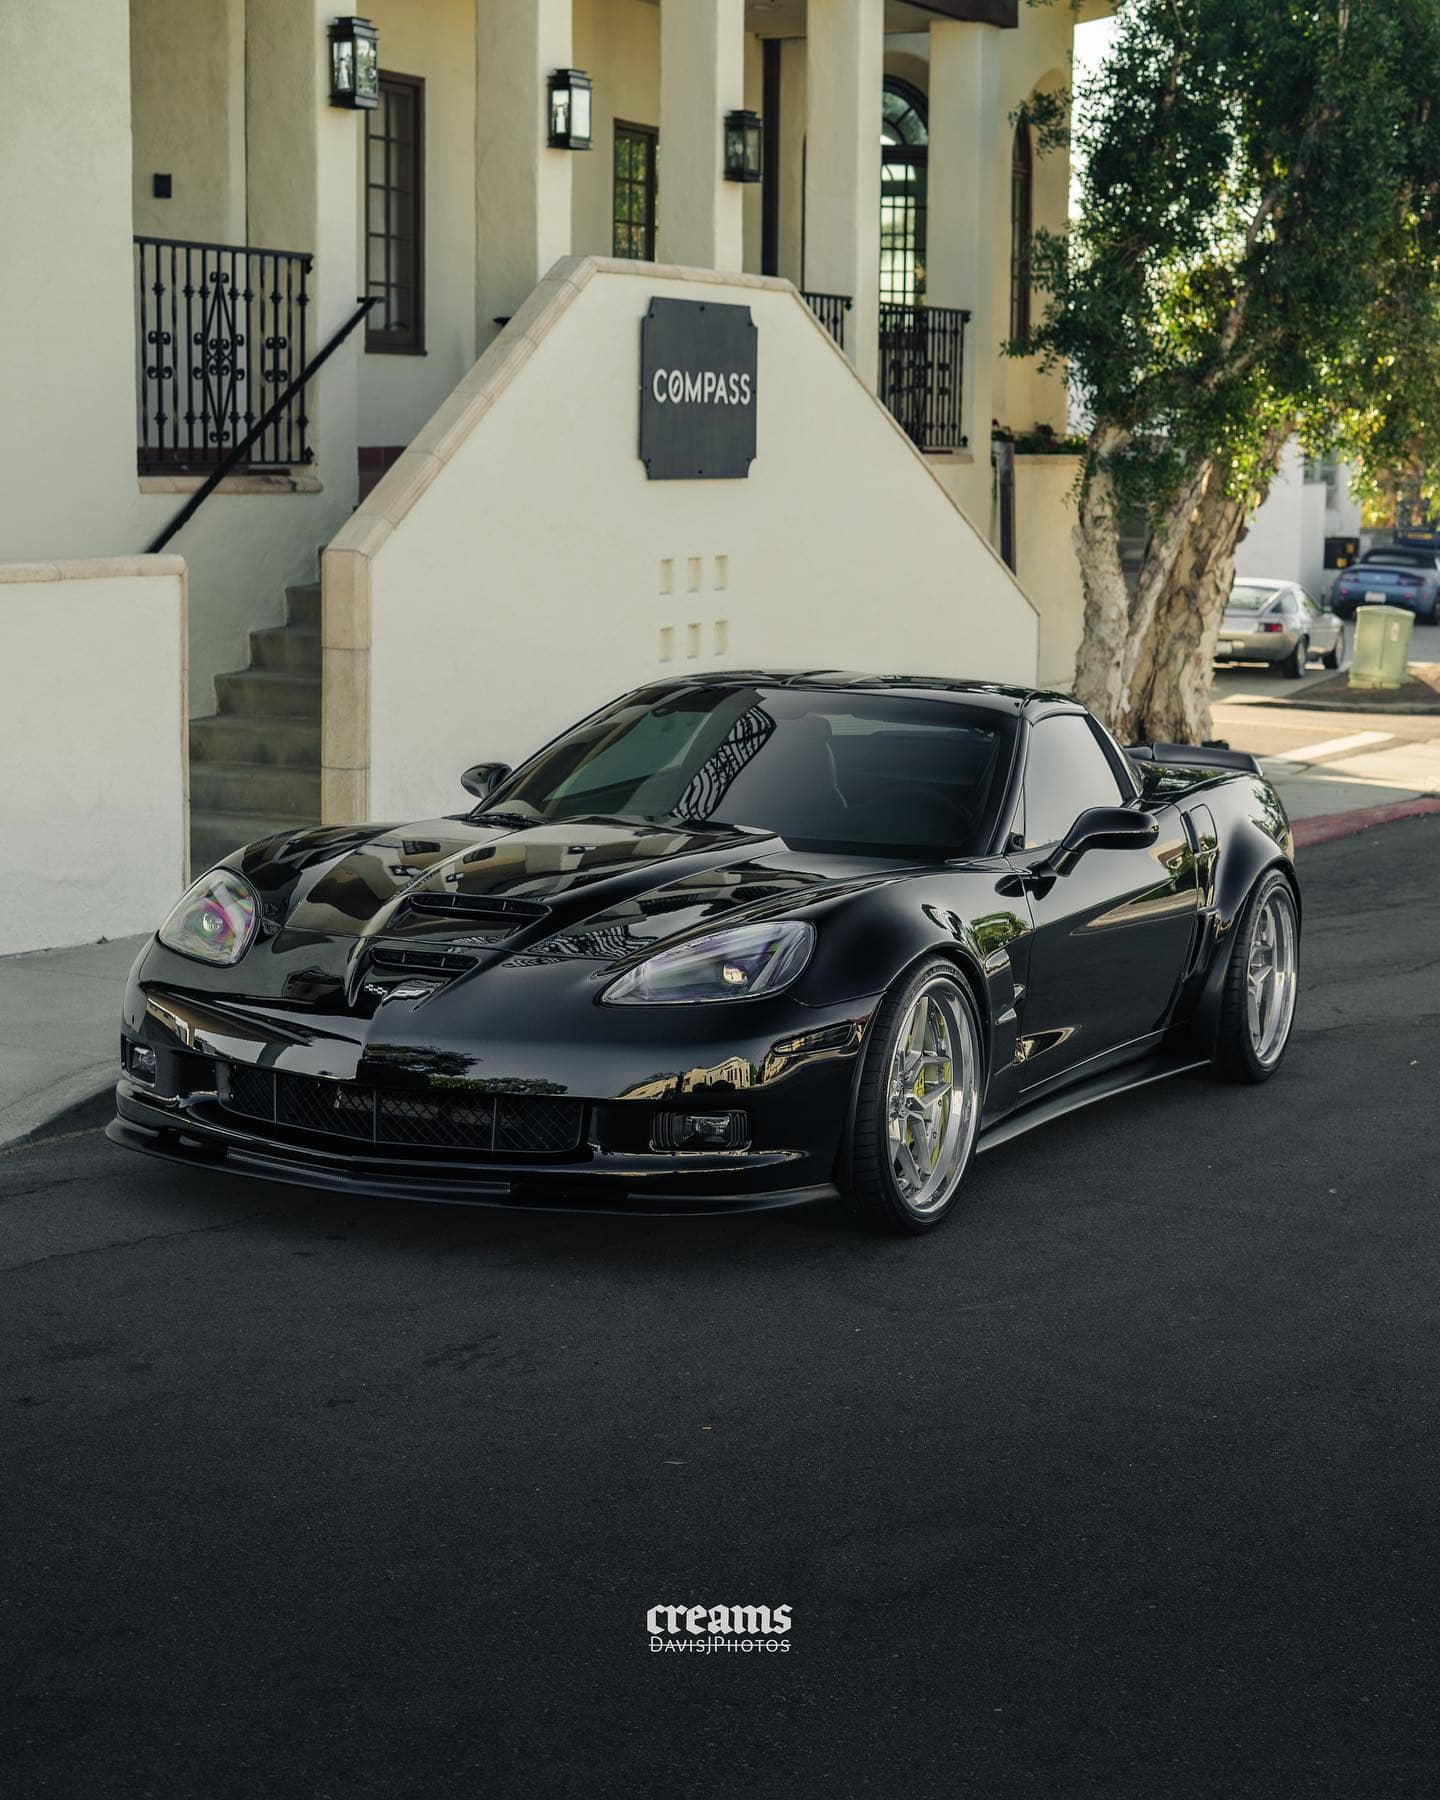 Wide body Chevy Corvette C6 Lingenfelter supercharged on PFADT Stage 3 suspension package with adjustable coilovers